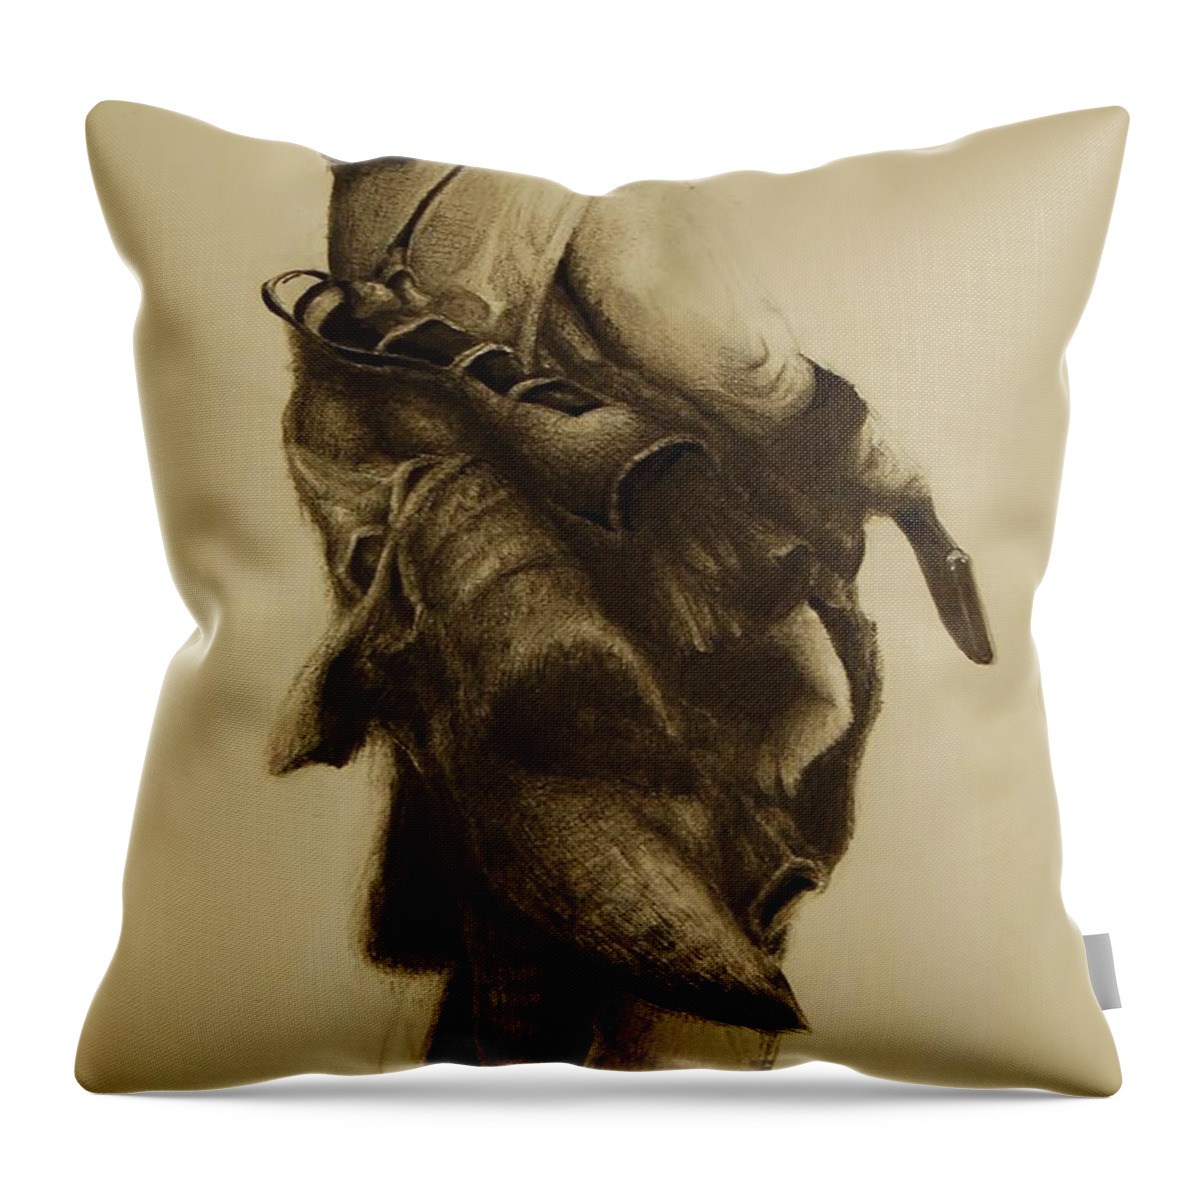 Indian Throw Pillow featuring the drawing Hunter by Jean Cormier